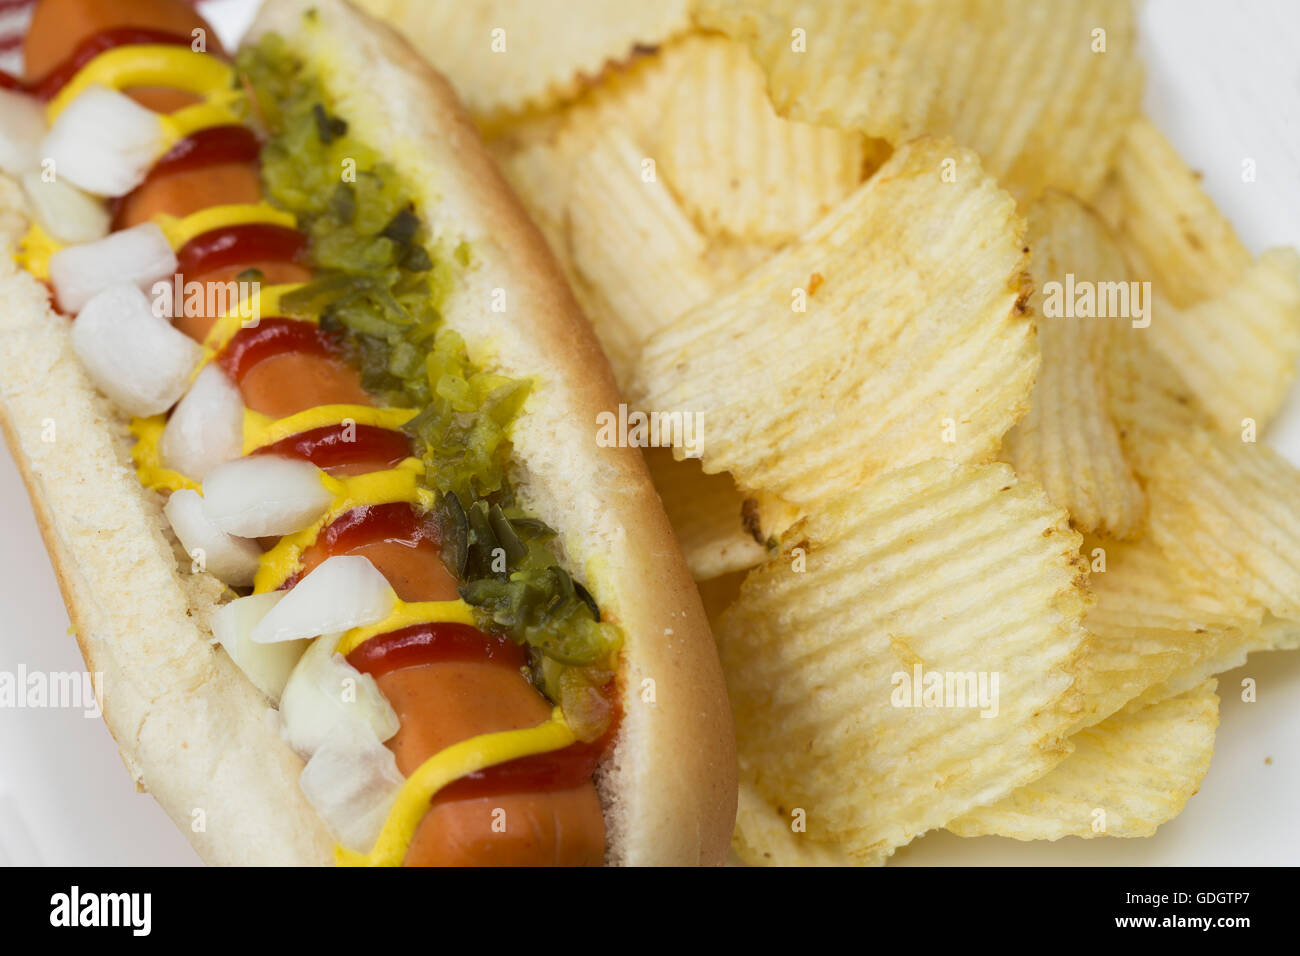 Veggie hot dog topped with mustard, ketchup, onions and relish, served with potato crisps (chips). Stock Photo